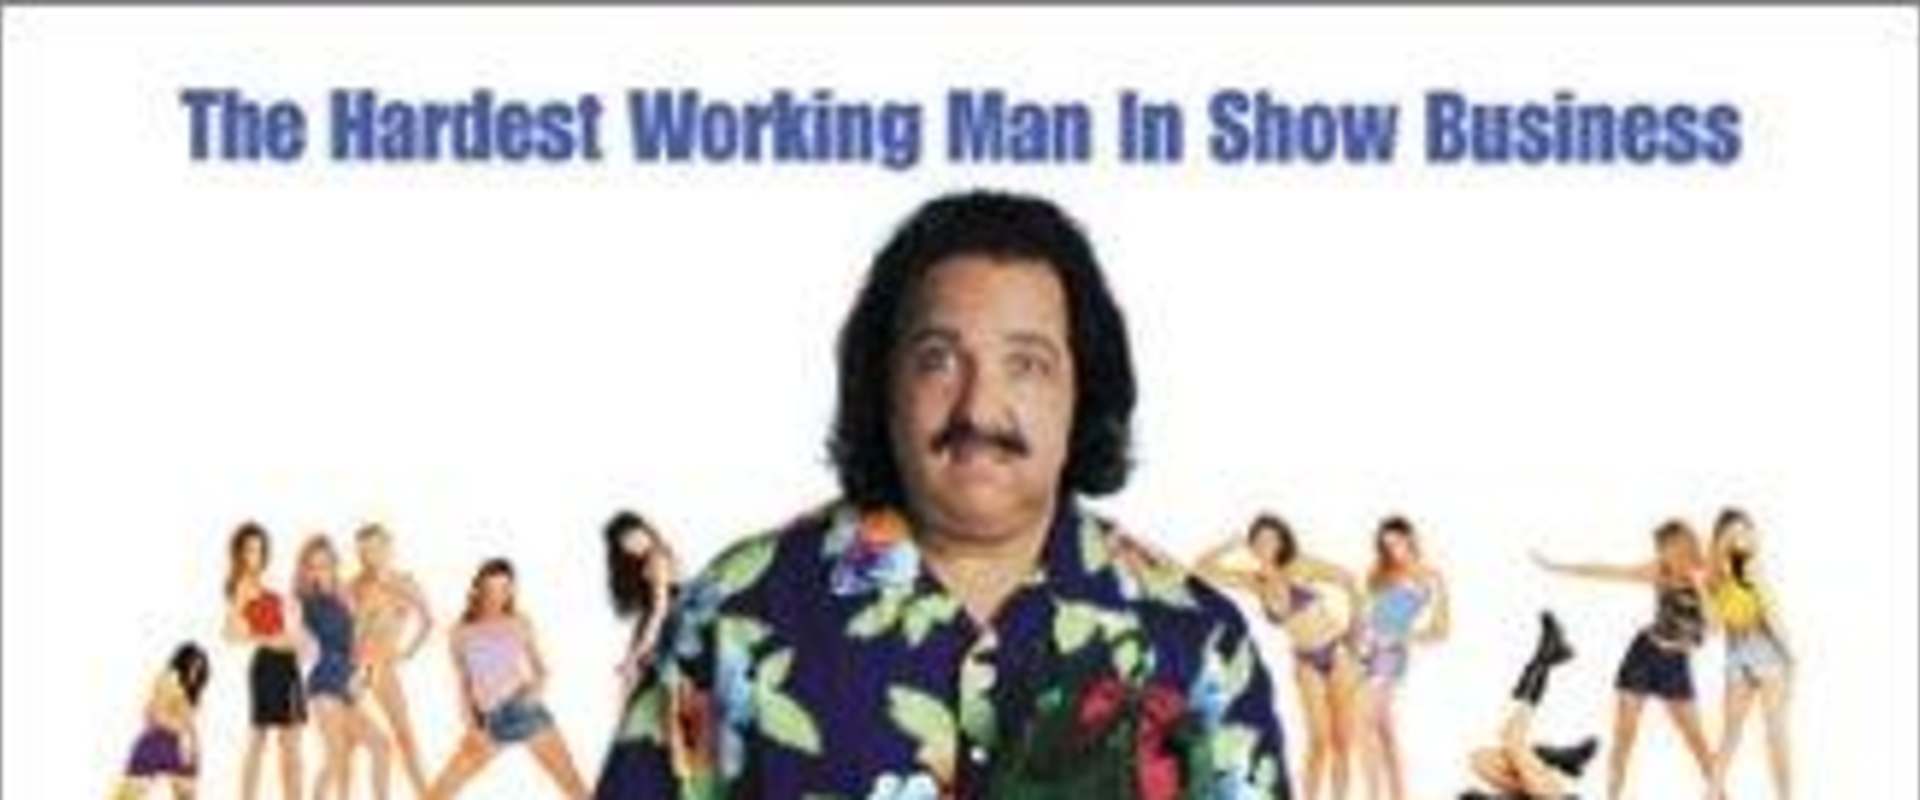 Watch Porn Star The Legend Of Ron Jeremy On Netflix Today